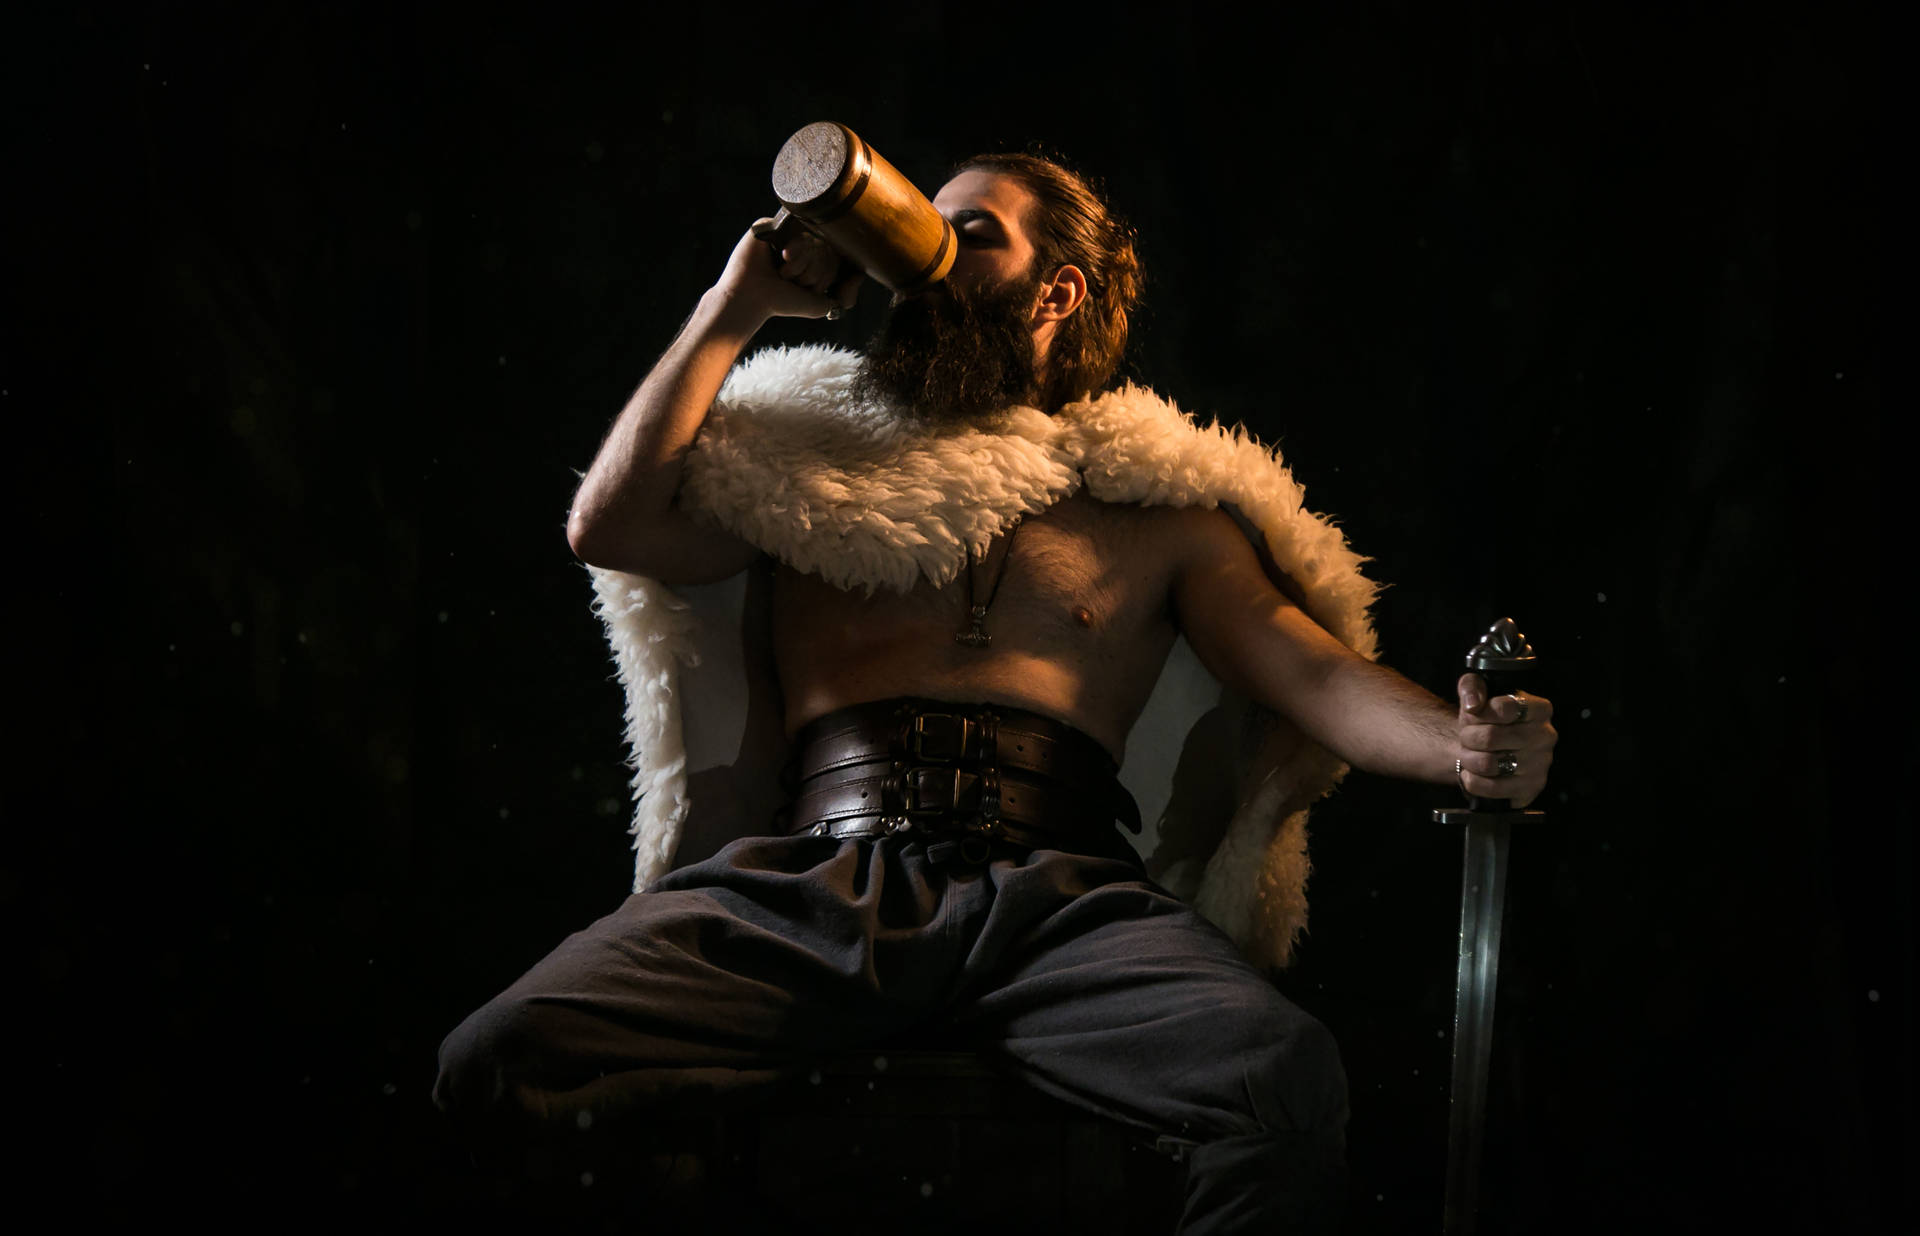 Warrior Drinking From Wooden Mug Picture